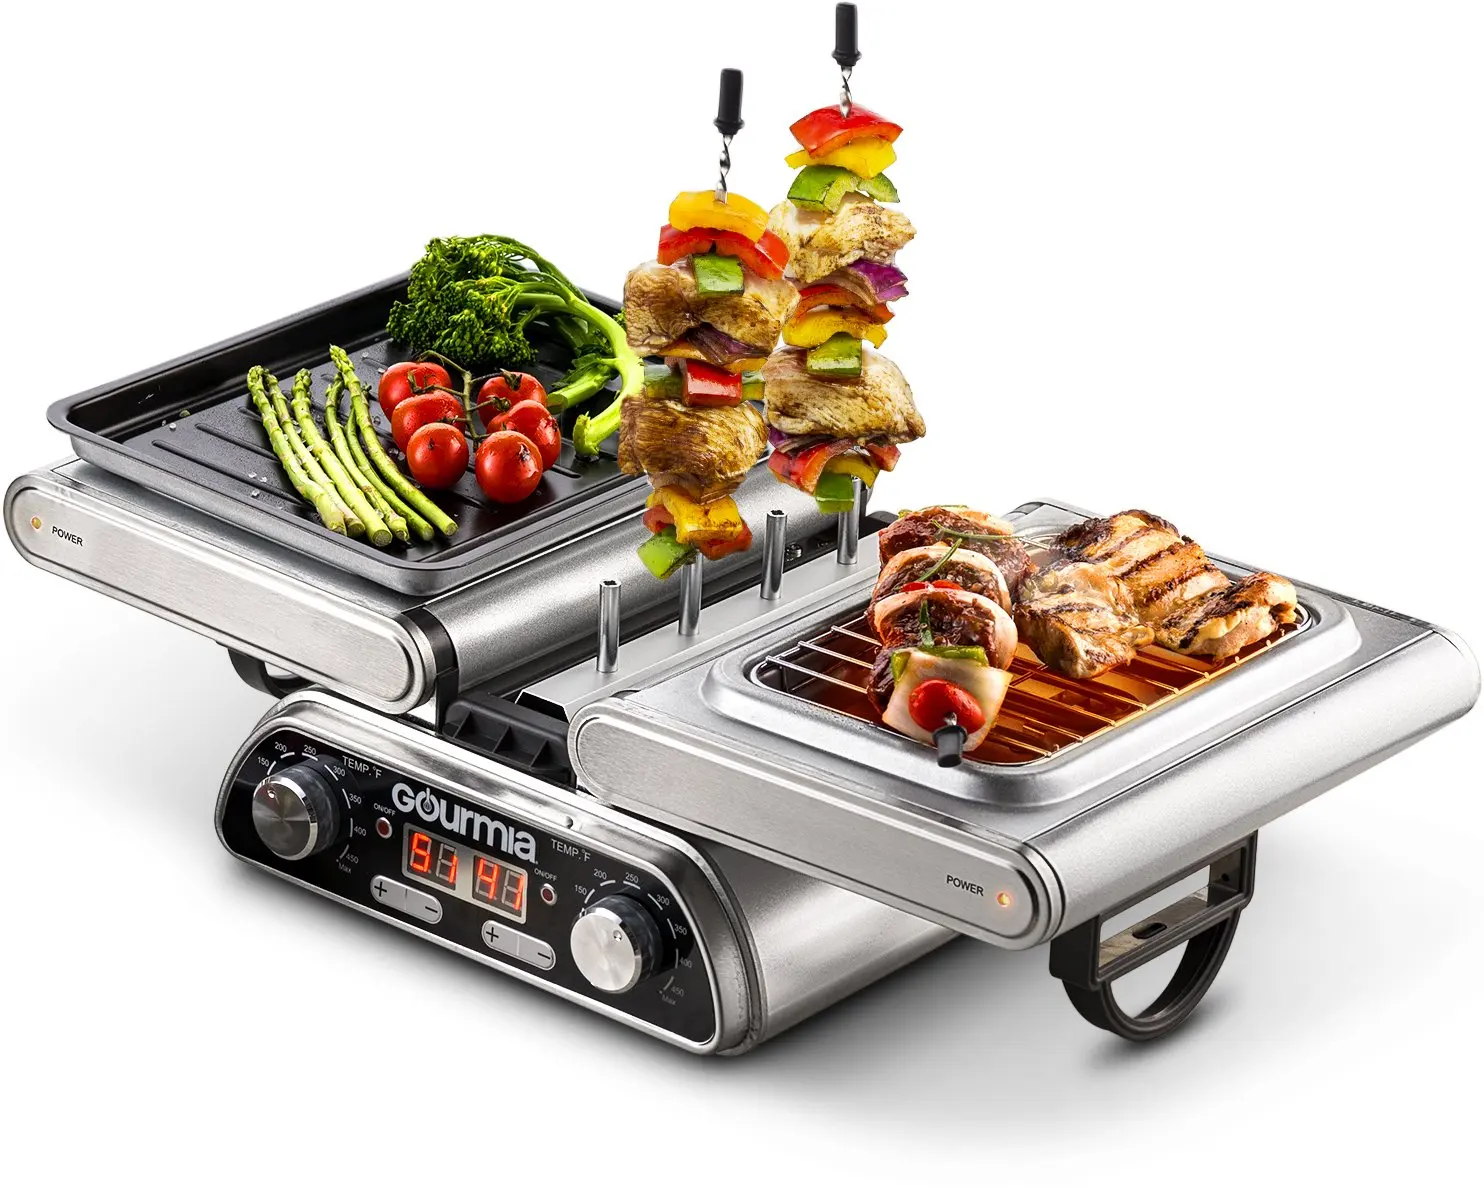 Gourmia GDG1900 Digital Dual Indoor Grill, Folds for Double Sided Steak Gri...